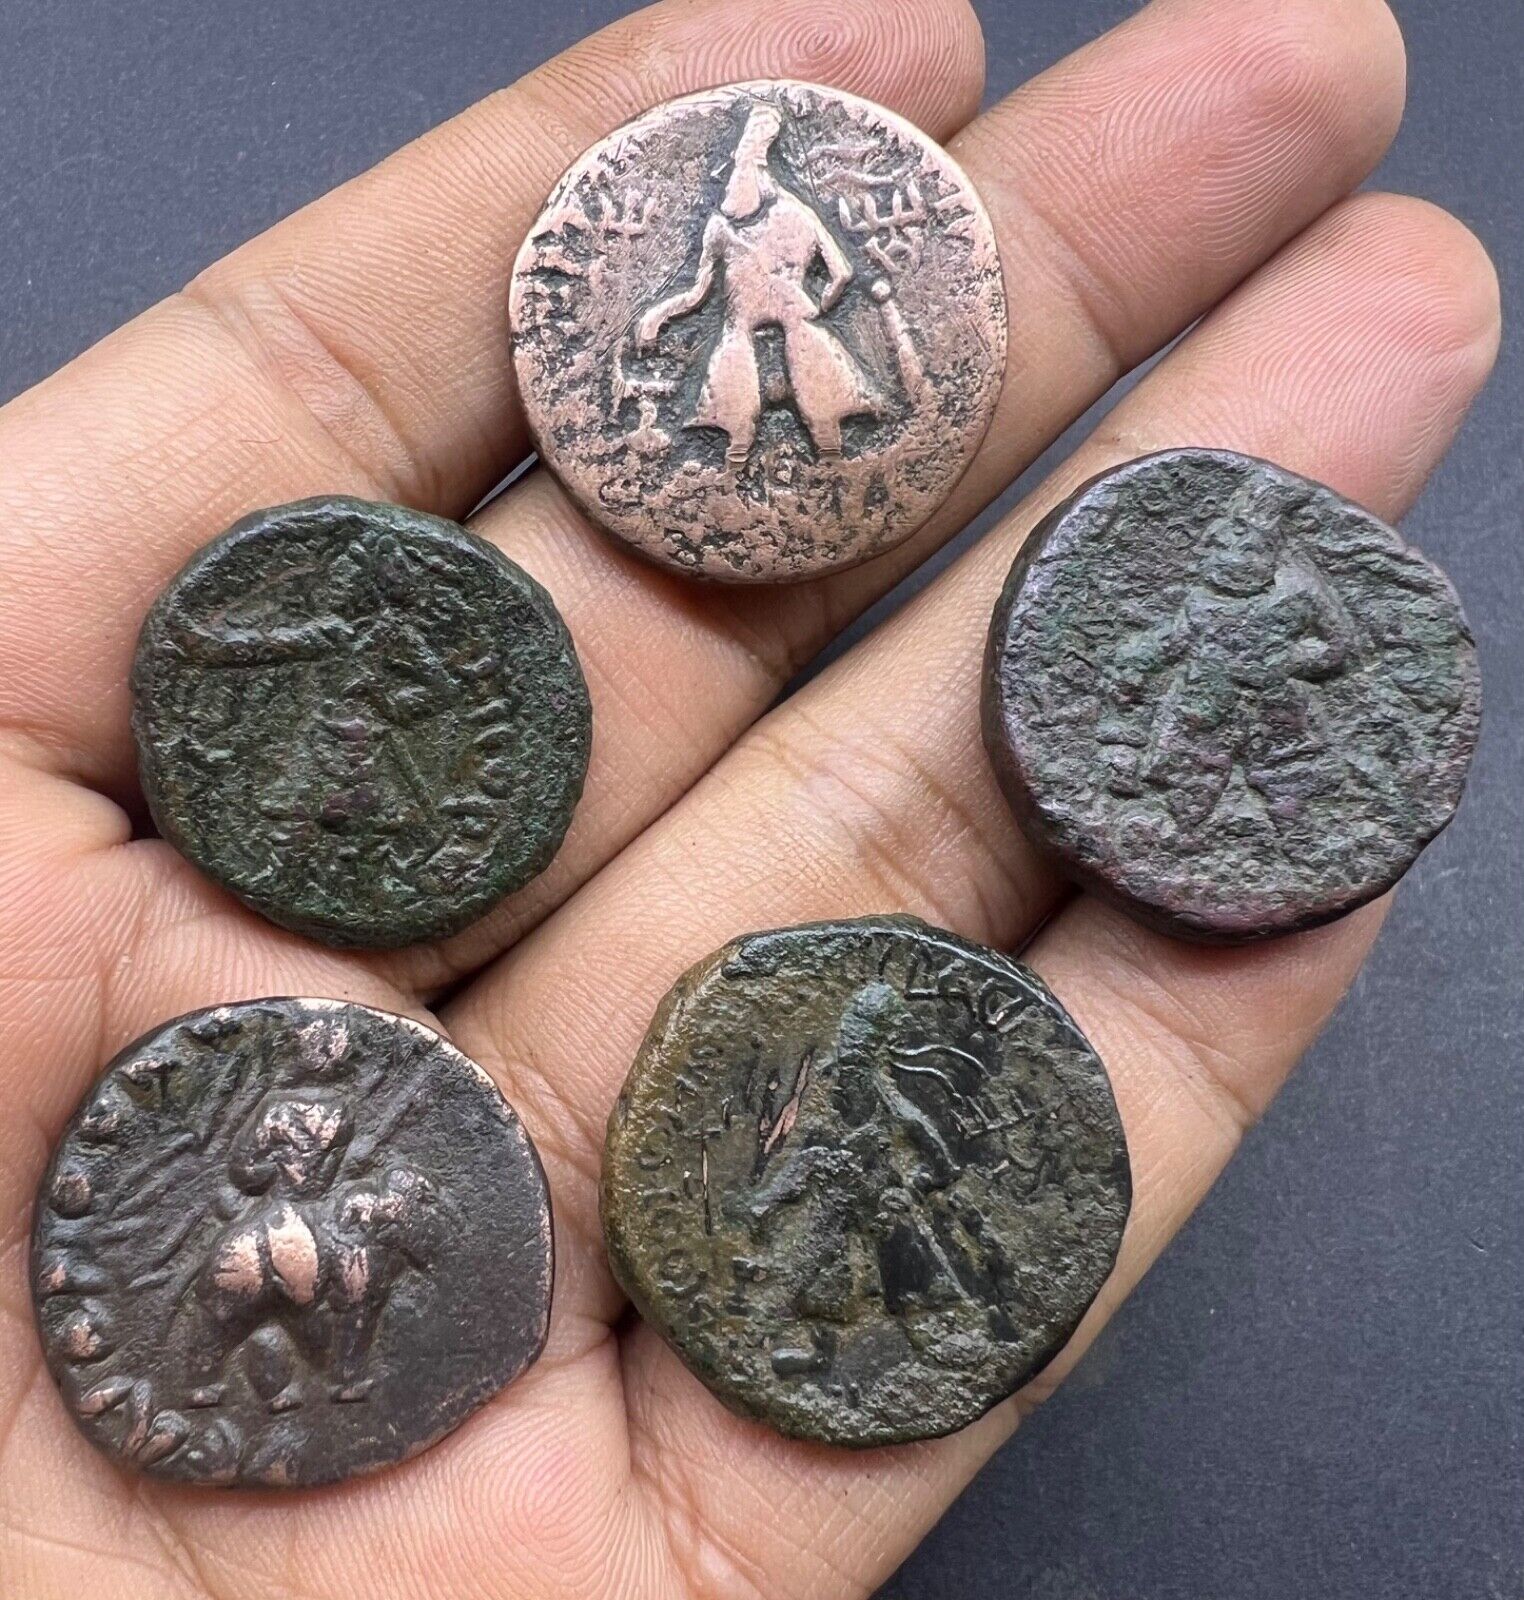 Lot 5 Antique India Indo Greek Kushan Bronze Copper Currency Old World Coins